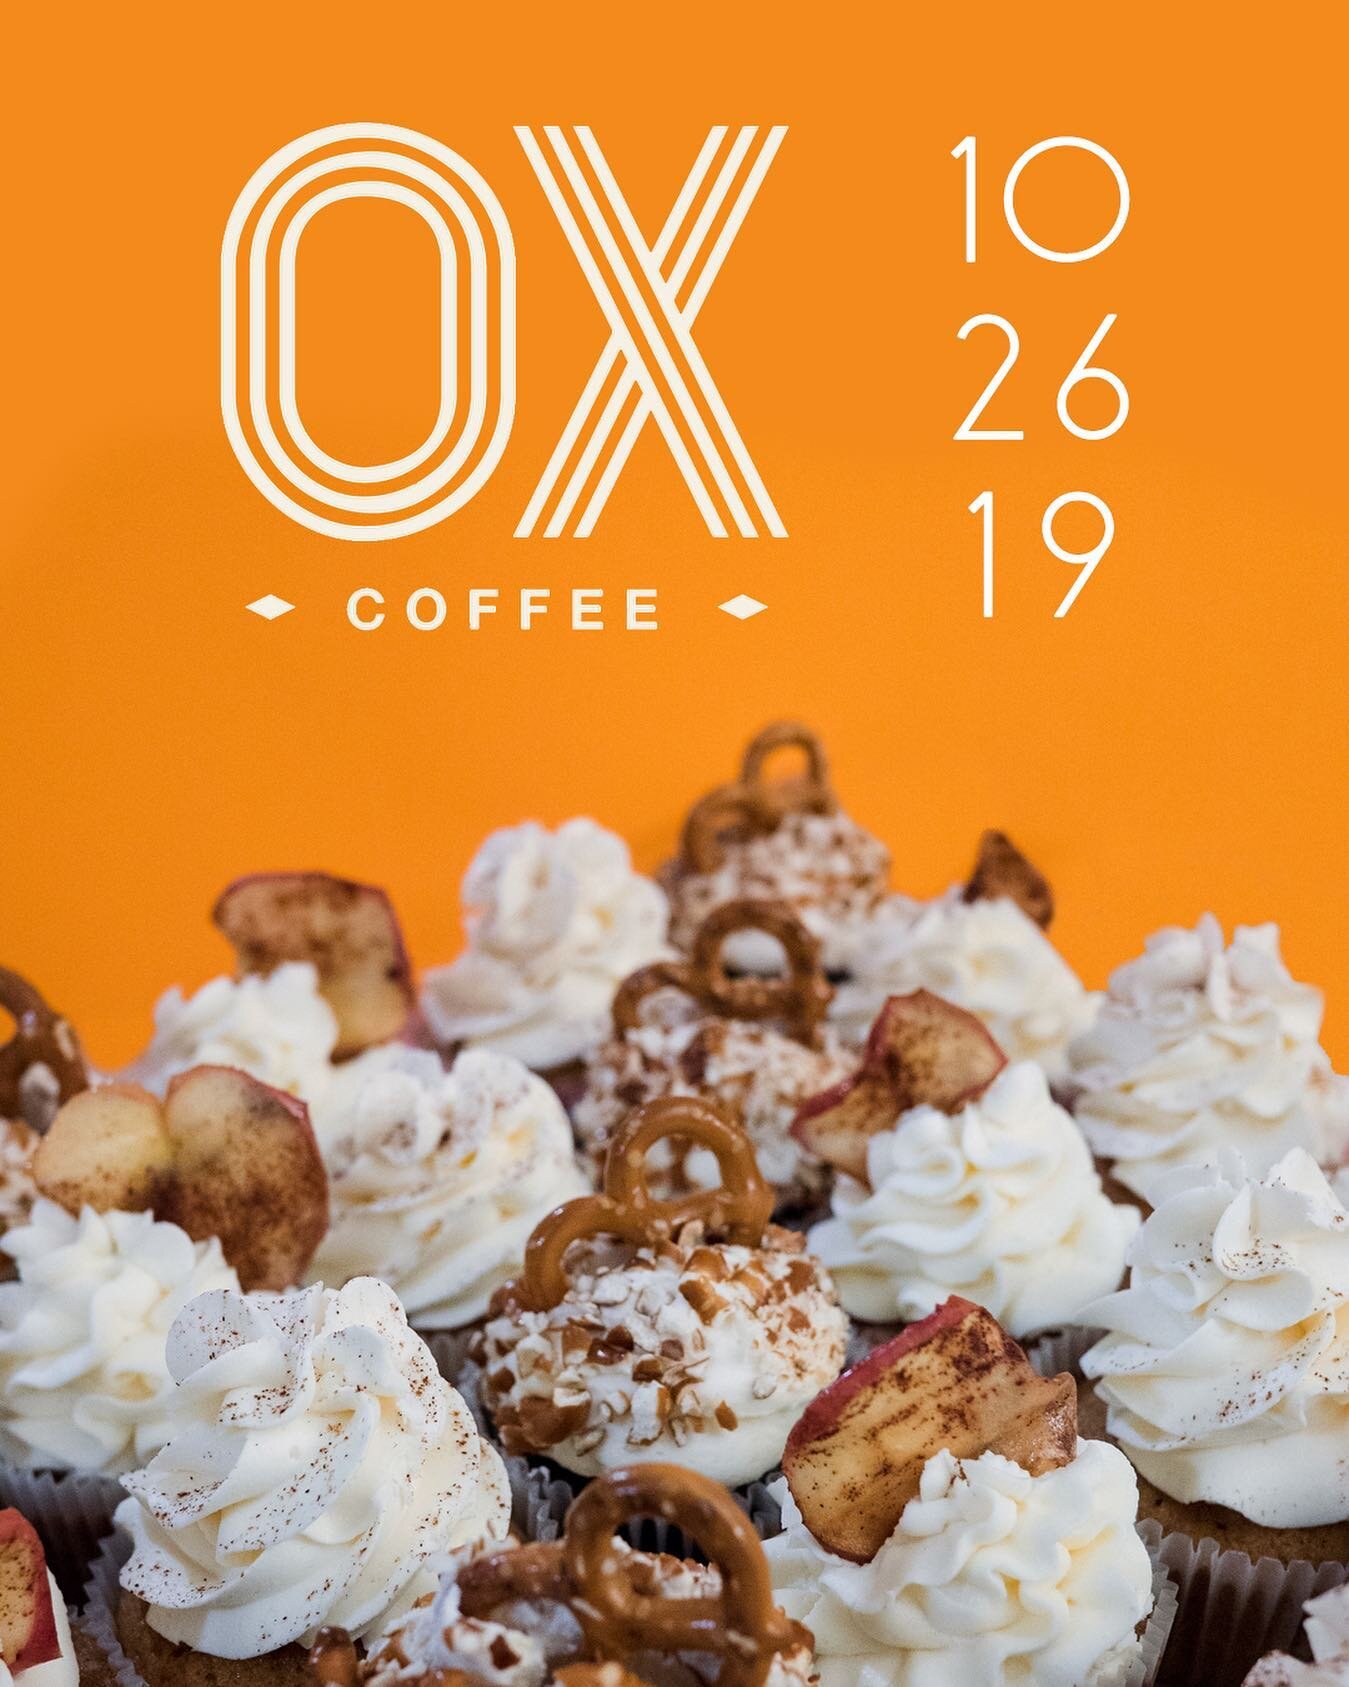 🍂🍁 This Saturday 10/26 we&rsquo;ll be hanging with our amazing friends at Ox Coffee! We&rsquo;ll be serving all of our fall flavors, so stop by and cozy up with some warm coffee and cupcakes! Pre-orders are available for pickup!!! See you there! 🍁